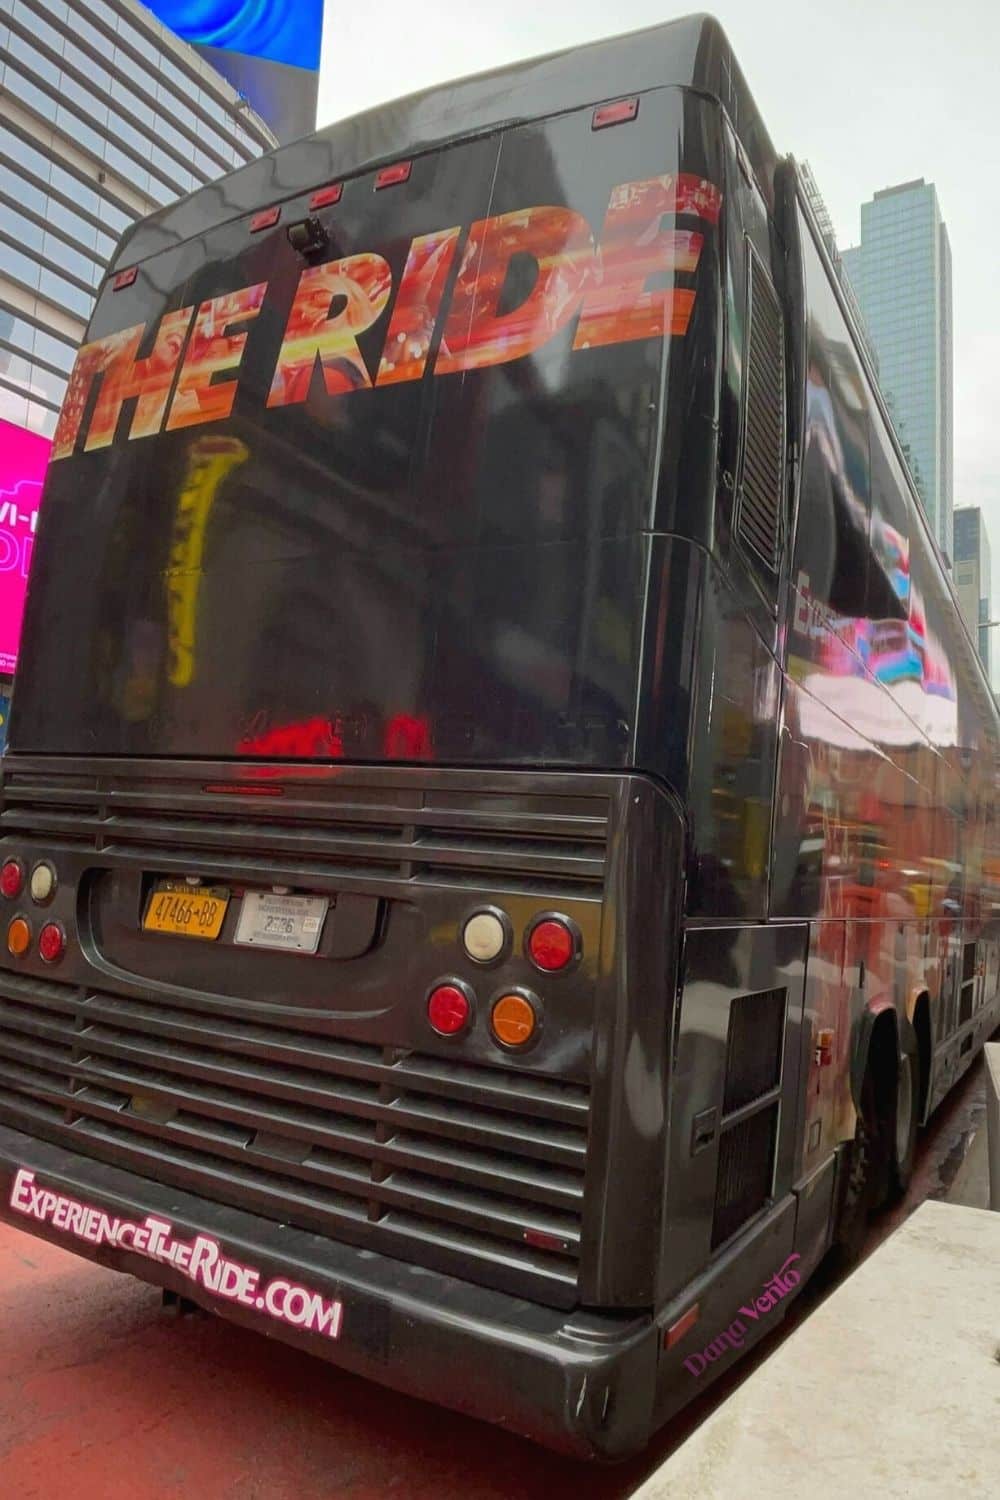 The RIDE NYC bus parked